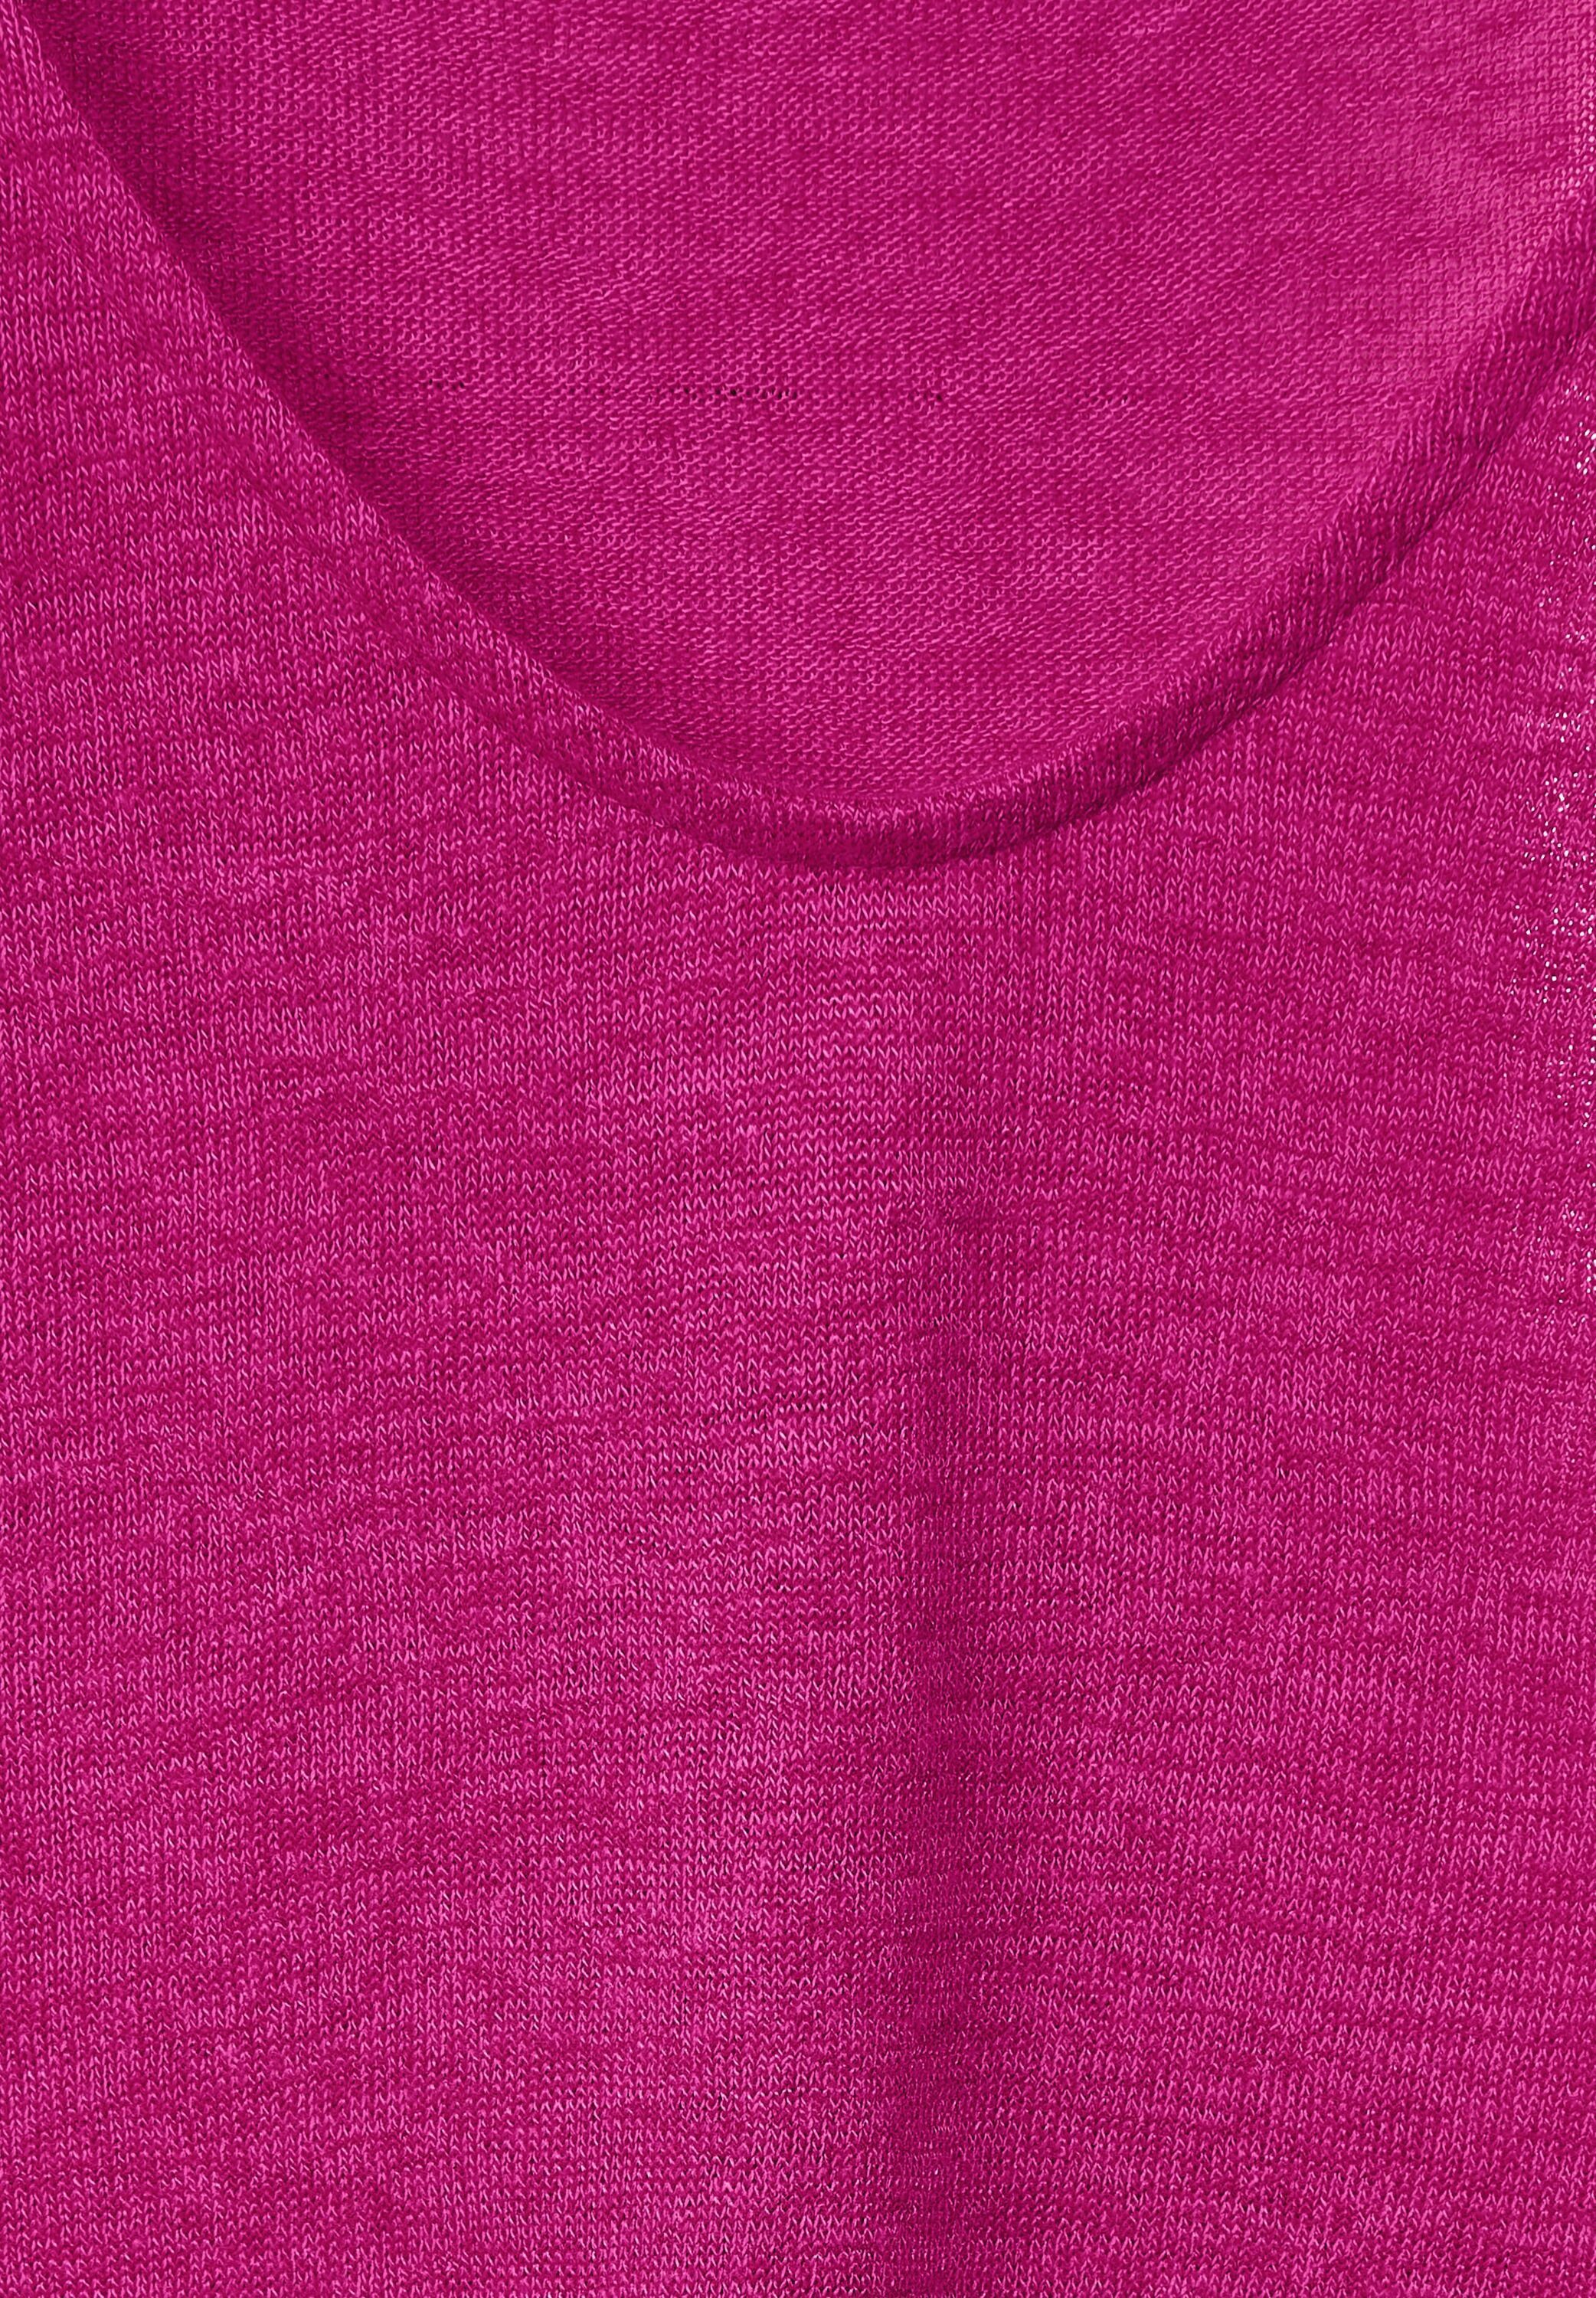 oasis Unifarbe in ONE pink V-Shirt STREET